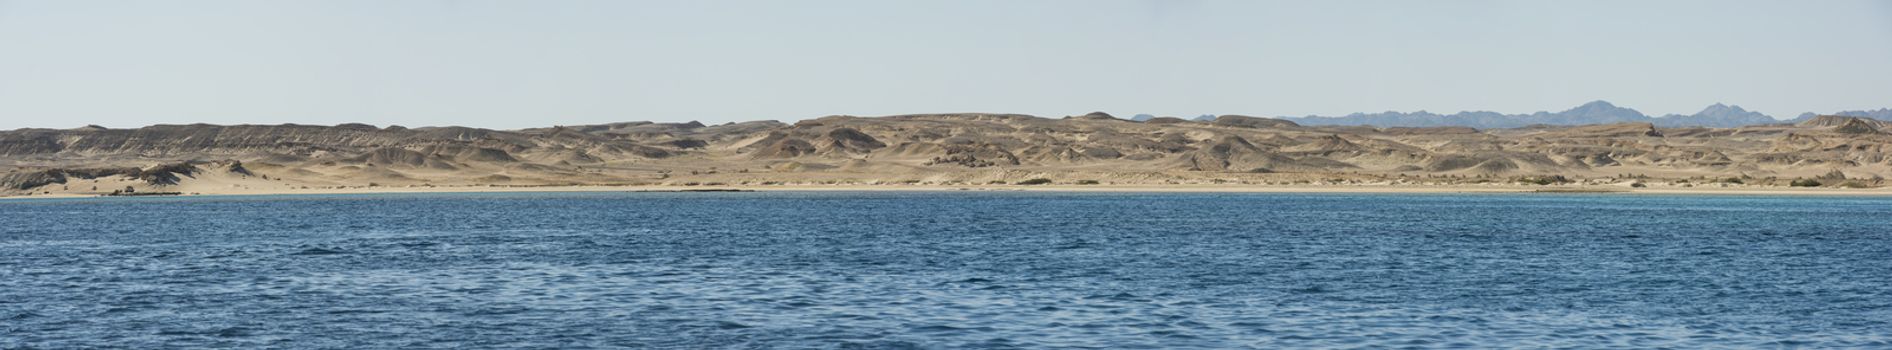 Panoramic view of a rocky remote desert coastline from tropical ocean